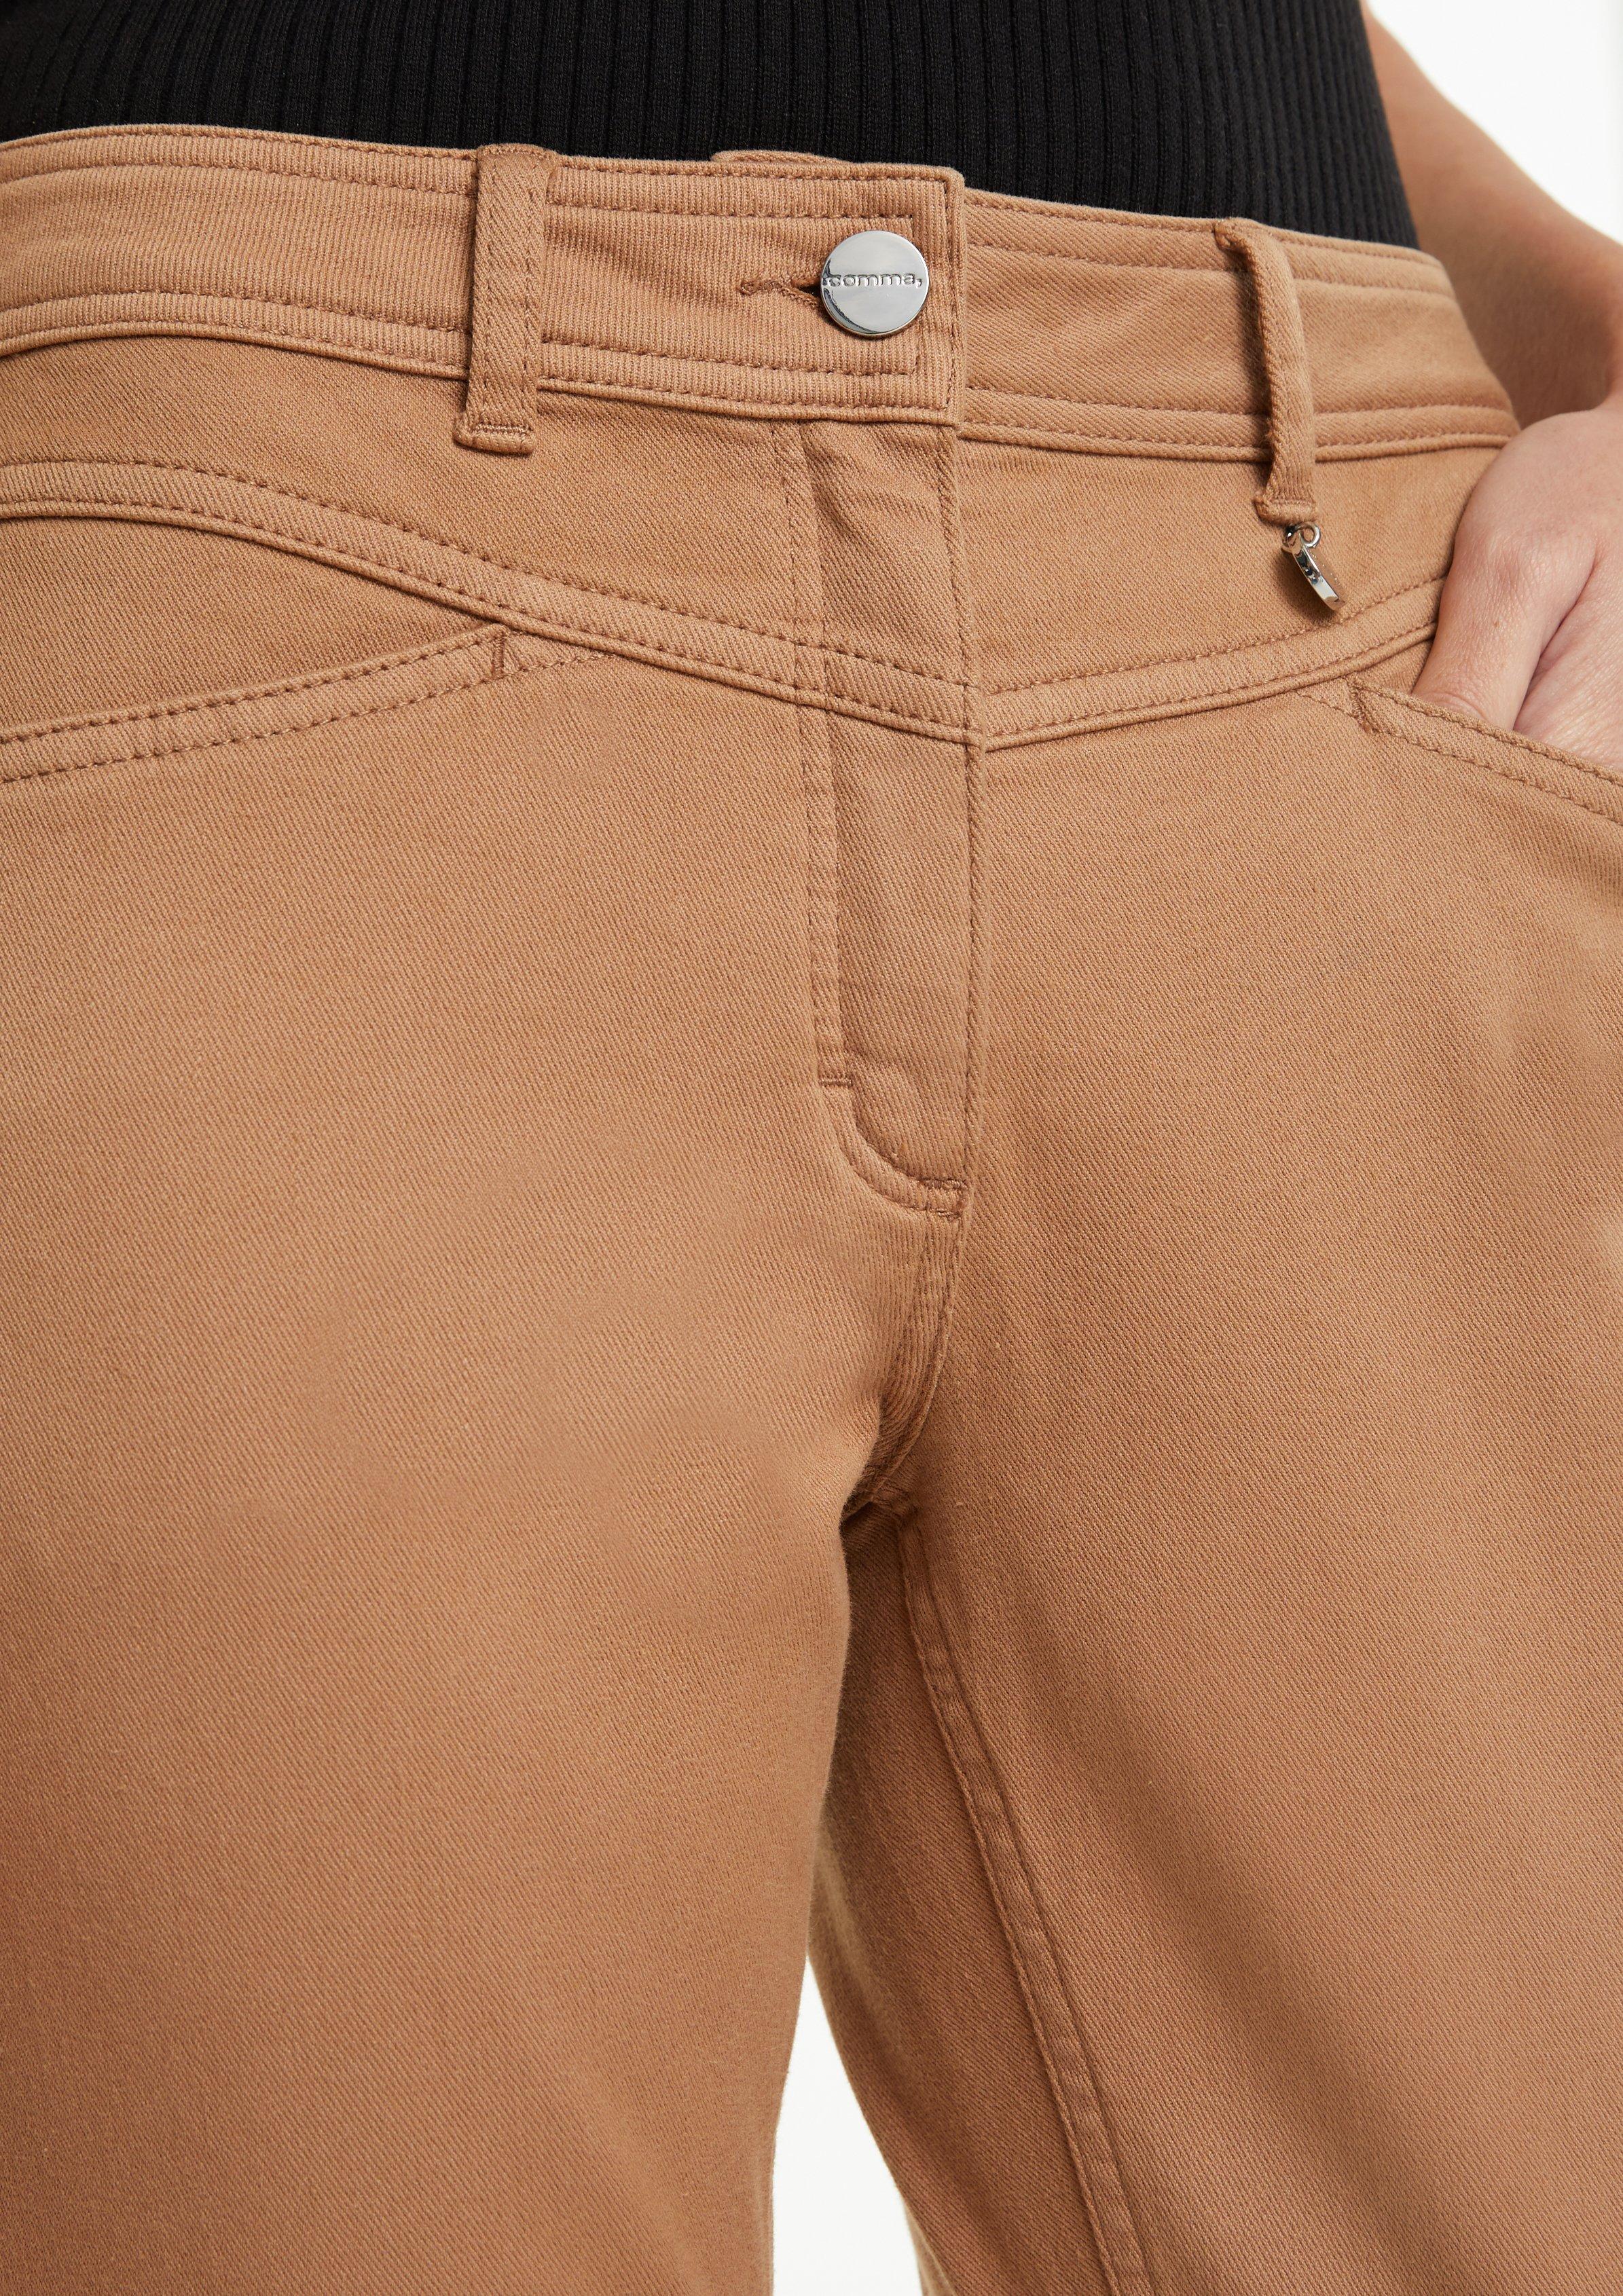 tan coloured jeans